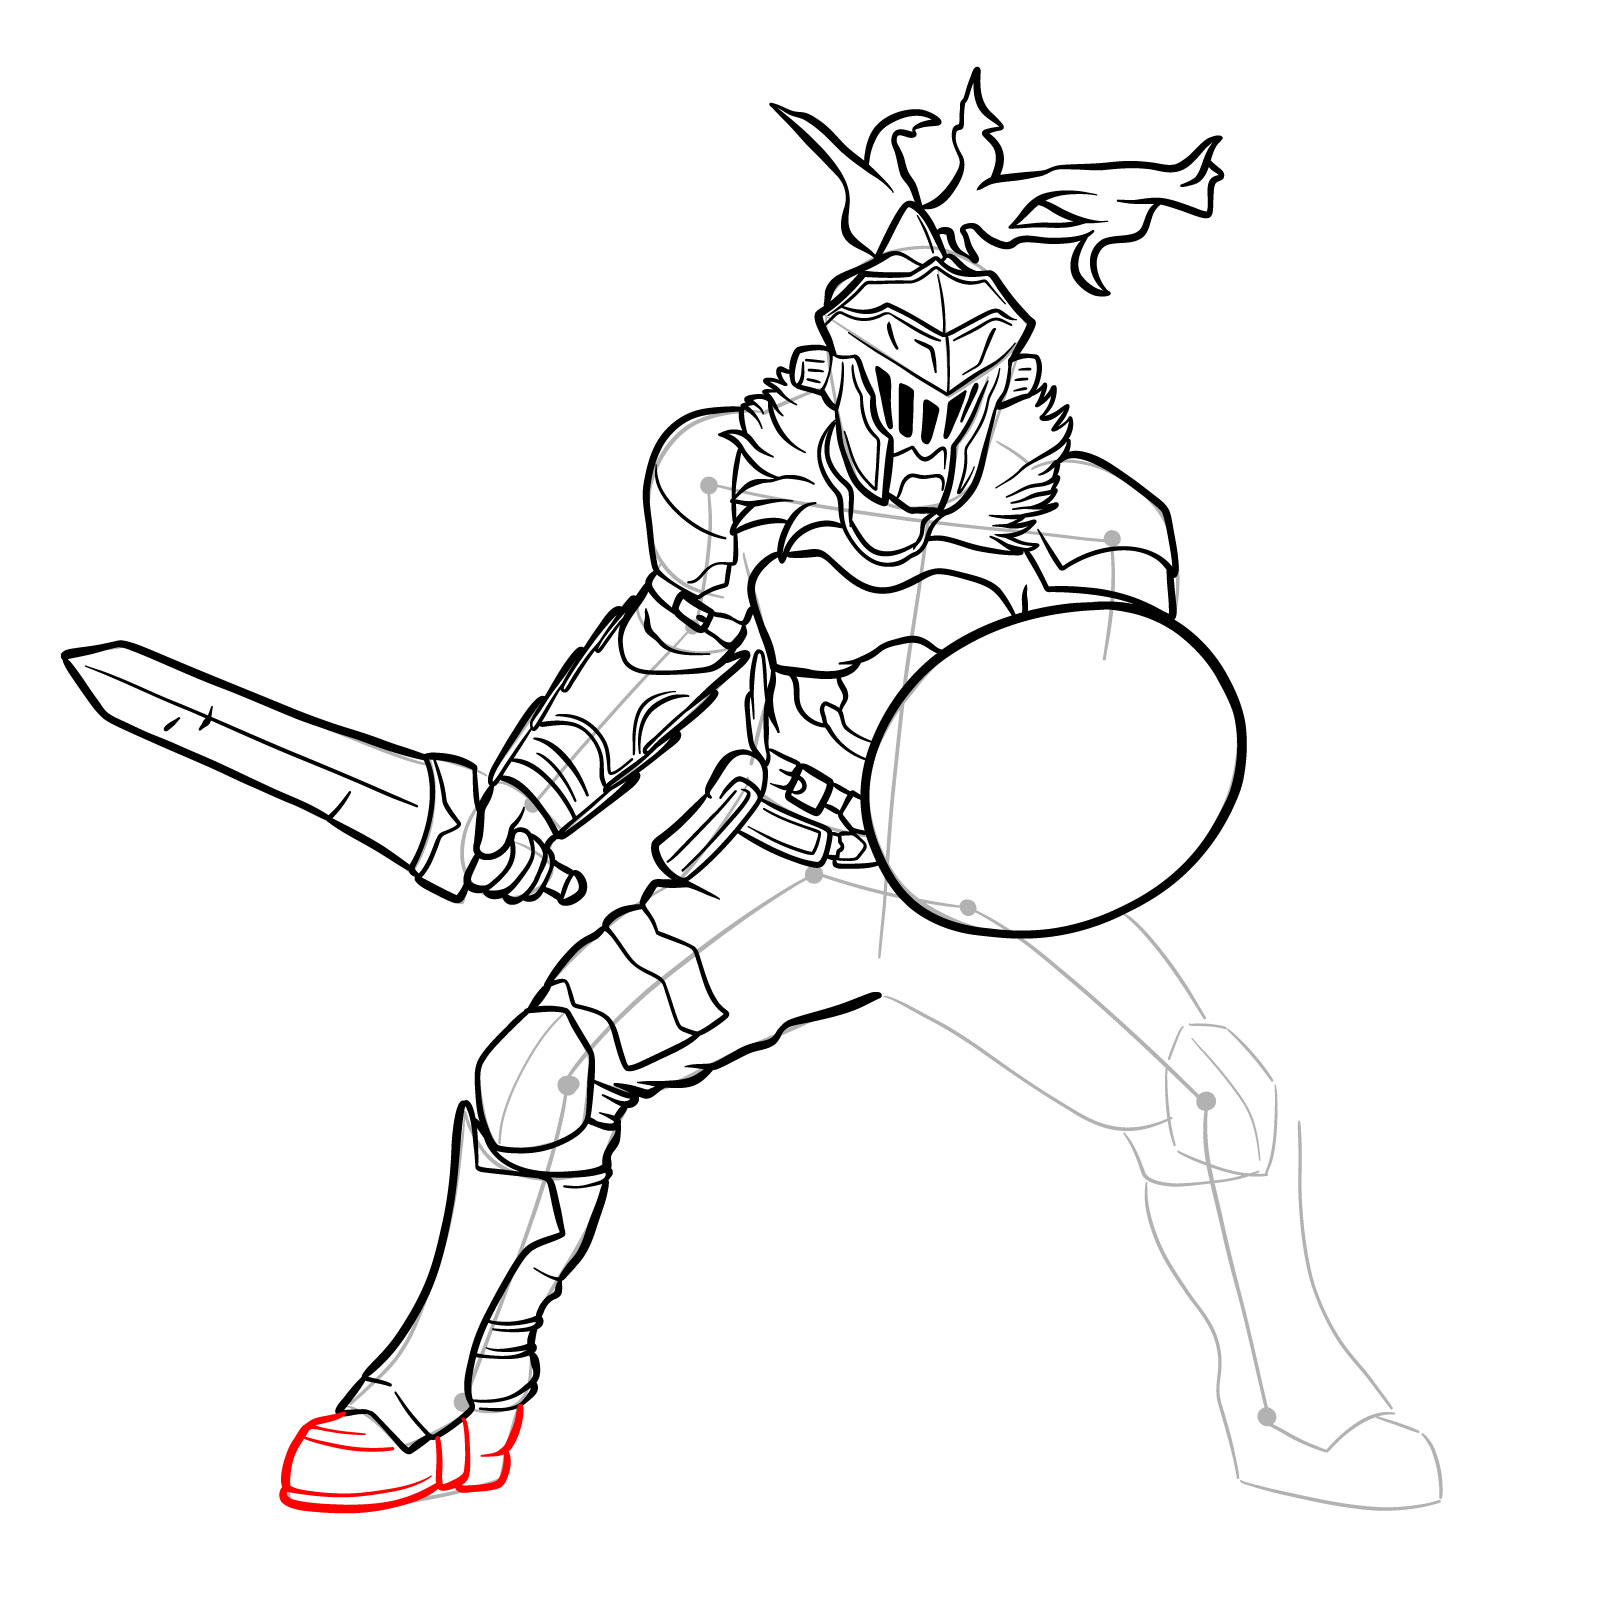 How to Draw Goblin Slayer in battle stance - step 31